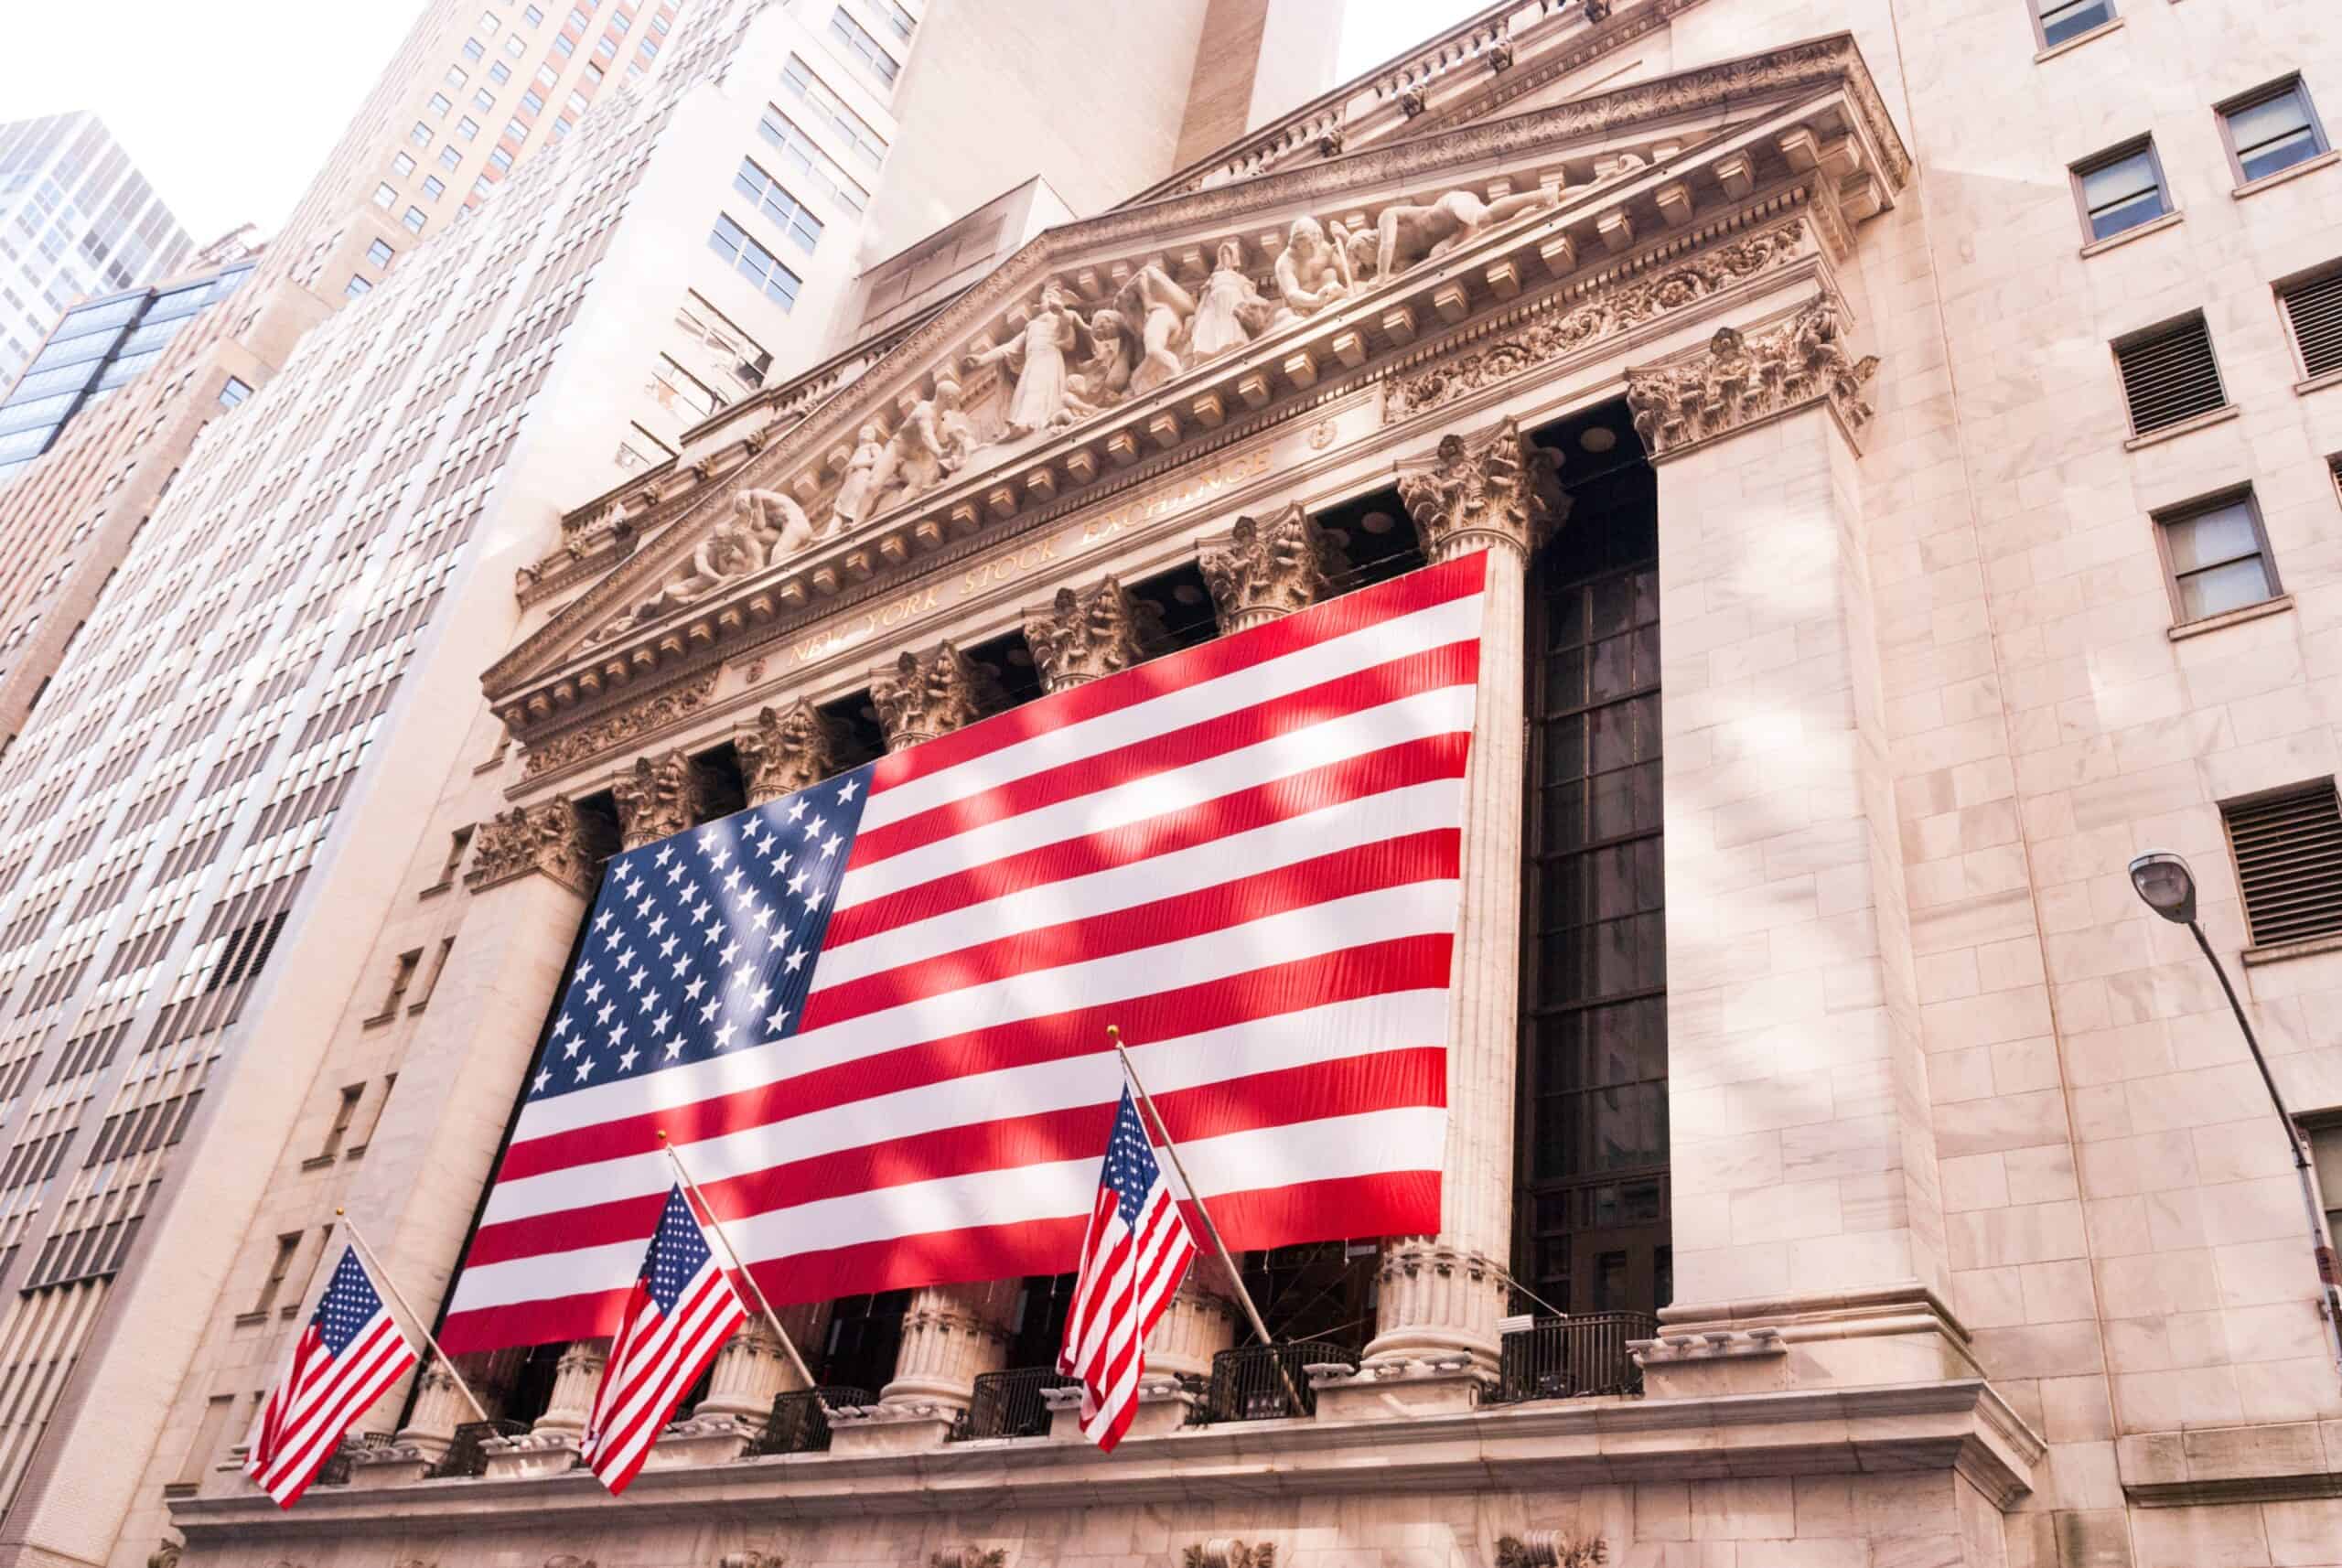 Image of New York Stock Exchange building draped in American flags